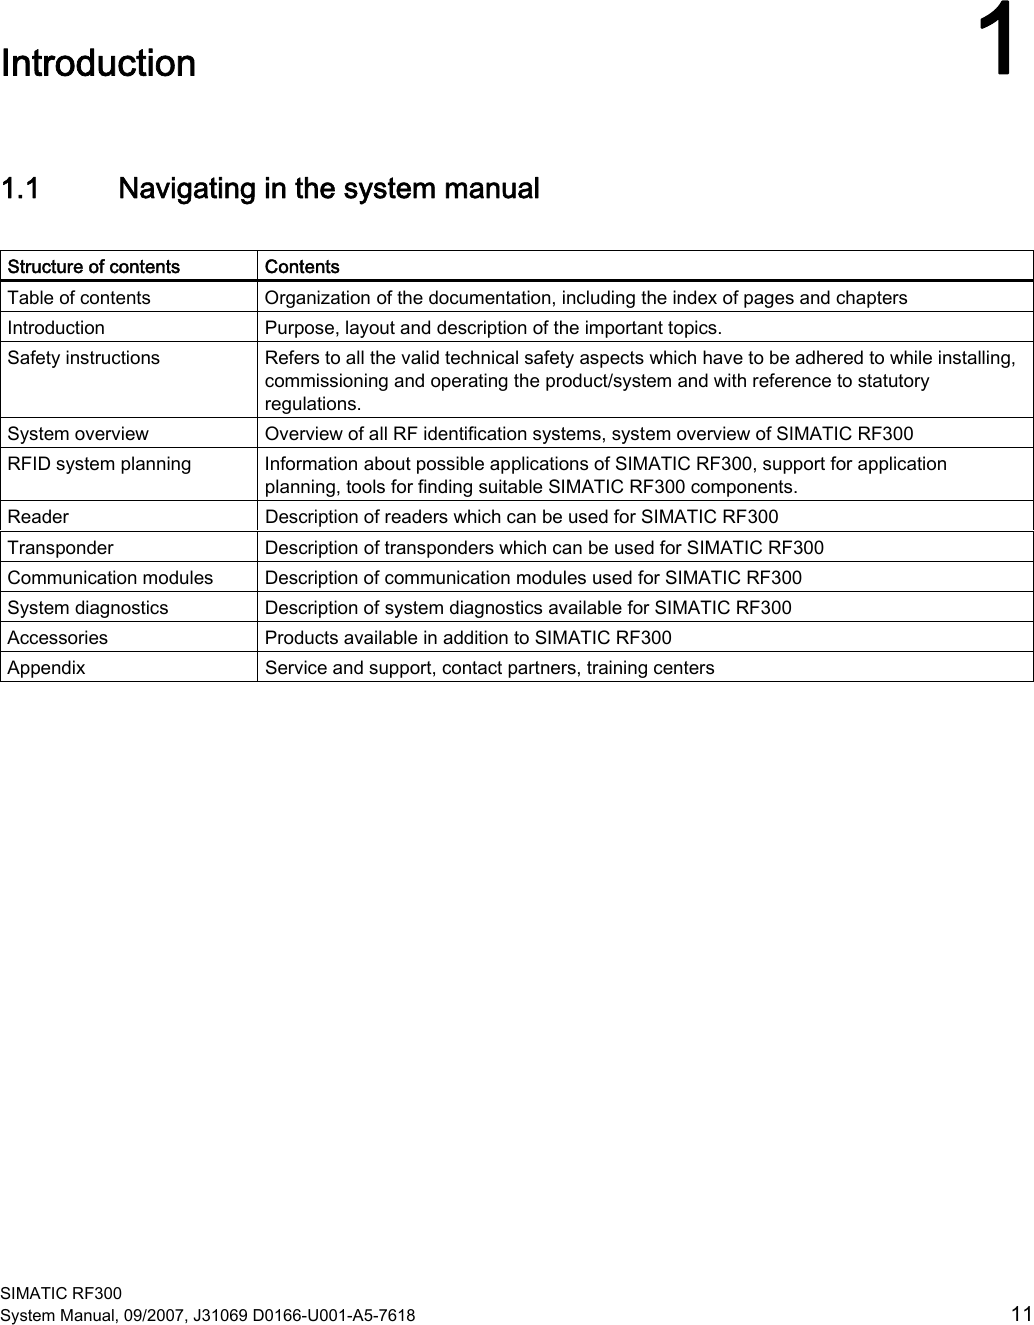  SIMATIC RF300 System Manual, 09/2007, J31069 D0166-U001-A5-7618  11 Introduction  11.1 Navigating in the system manual  Structure of contents   Contents Table of contents  Organization of the documentation, including the index of pages and chapters Introduction  Purpose, layout and description of the important topics. Safety instructions  Refers to all the valid technical safety aspects which have to be adhered to while installing, commissioning and operating the product/system and with reference to statutory regulations. System overview  Overview of all RF identification systems, system overview of SIMATIC RF300 RFID system planning  Information about possible applications of SIMATIC RF300, support for application planning, tools for finding suitable SIMATIC RF300 components.  Reader   Description of readers which can be used for SIMATIC RF300 Transponder  Description of transponders which can be used for SIMATIC RF300 Communication modules  Description of communication modules used for SIMATIC RF300 System diagnostics  Description of system diagnostics available for SIMATIC RF300 Accessories  Products available in addition to SIMATIC RF300 Appendix  Service and support, contact partners, training centers  